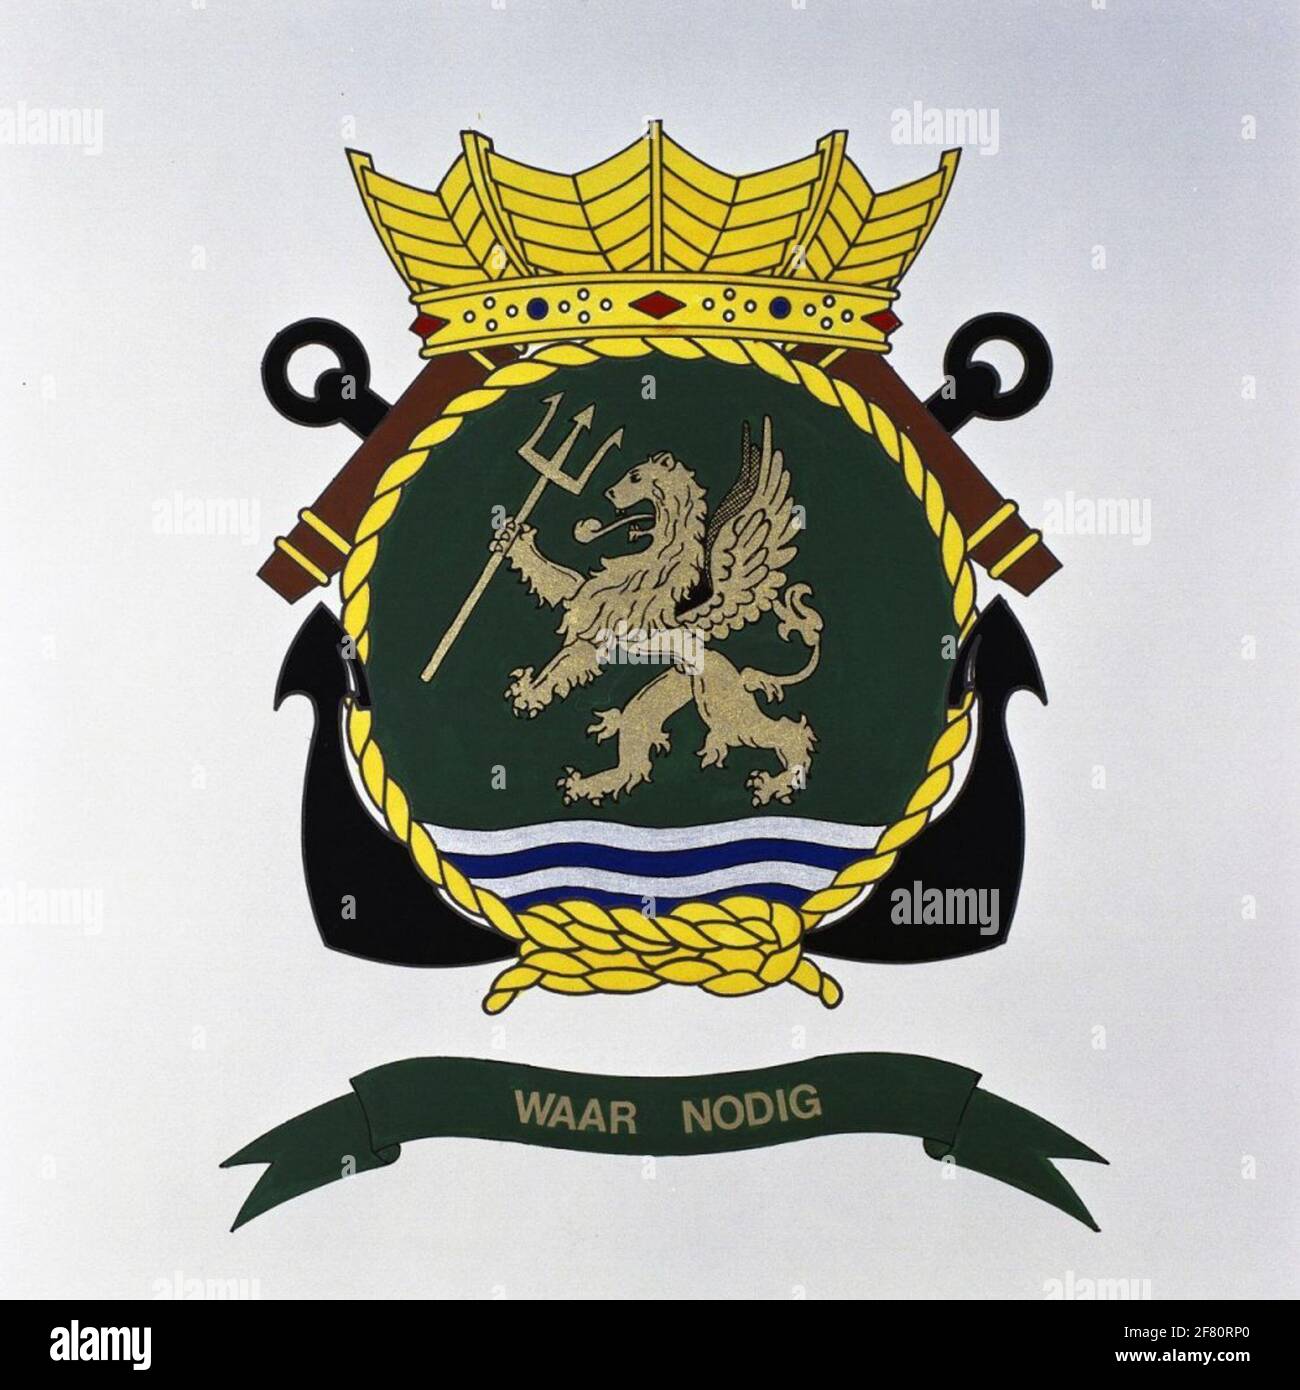 micro Weg huis natuurlijk Amphibious section (Amphsia) / Netherlands Marine Special Operations Force  (NLMARSOF). The emblem depicts the character of the Amphibian section of  the Marines Corps, which operates both countries and at sea and in